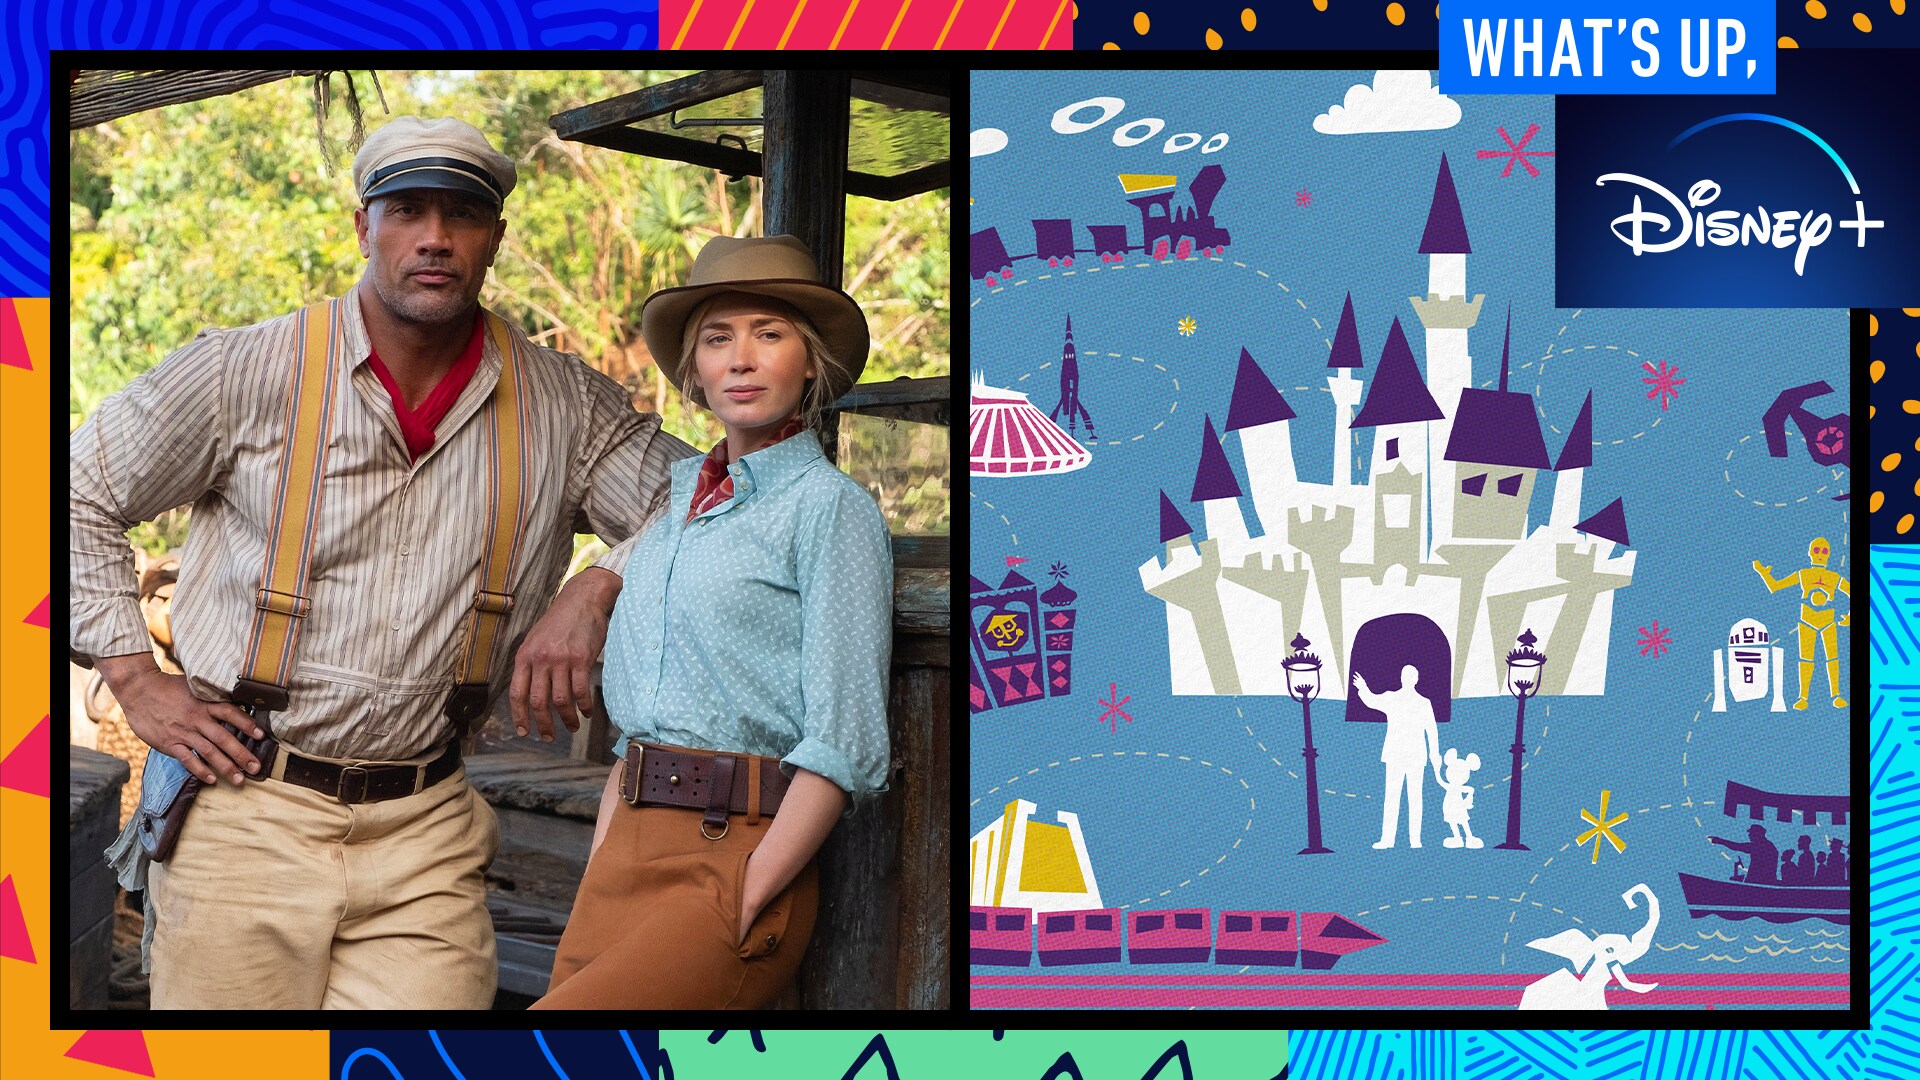 The Cast of Disney's Jungle Cruise and Behind the Attraction | What's Up, Disney+